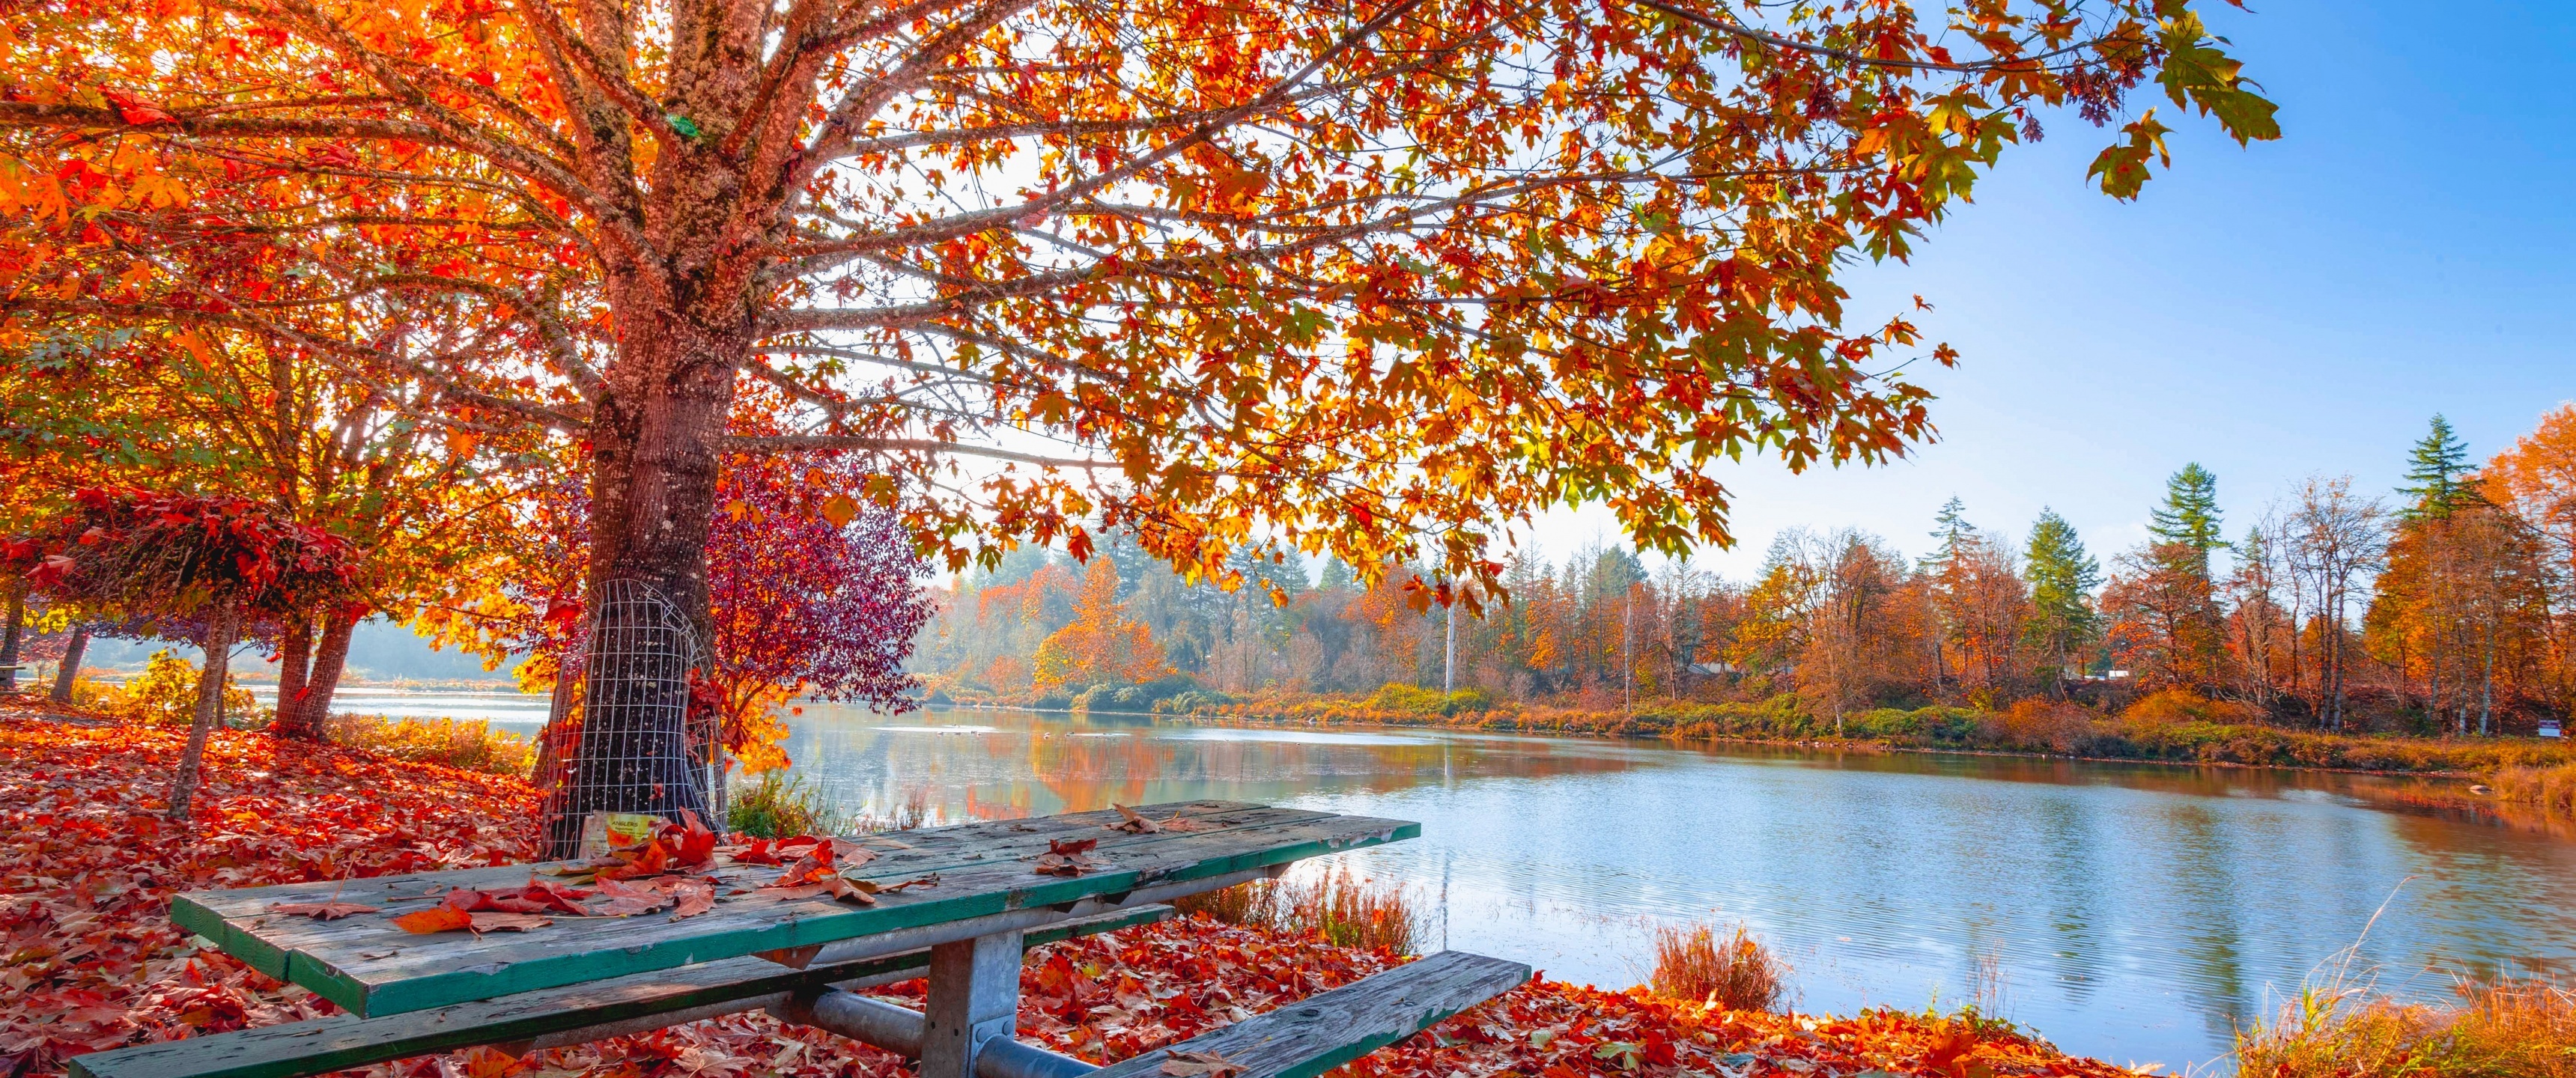 4K quality, Full-screen view, Autumnal ambiance, Nature's spectacle, Tree-lined vistas, 3440x1440 Dual Screen Desktop